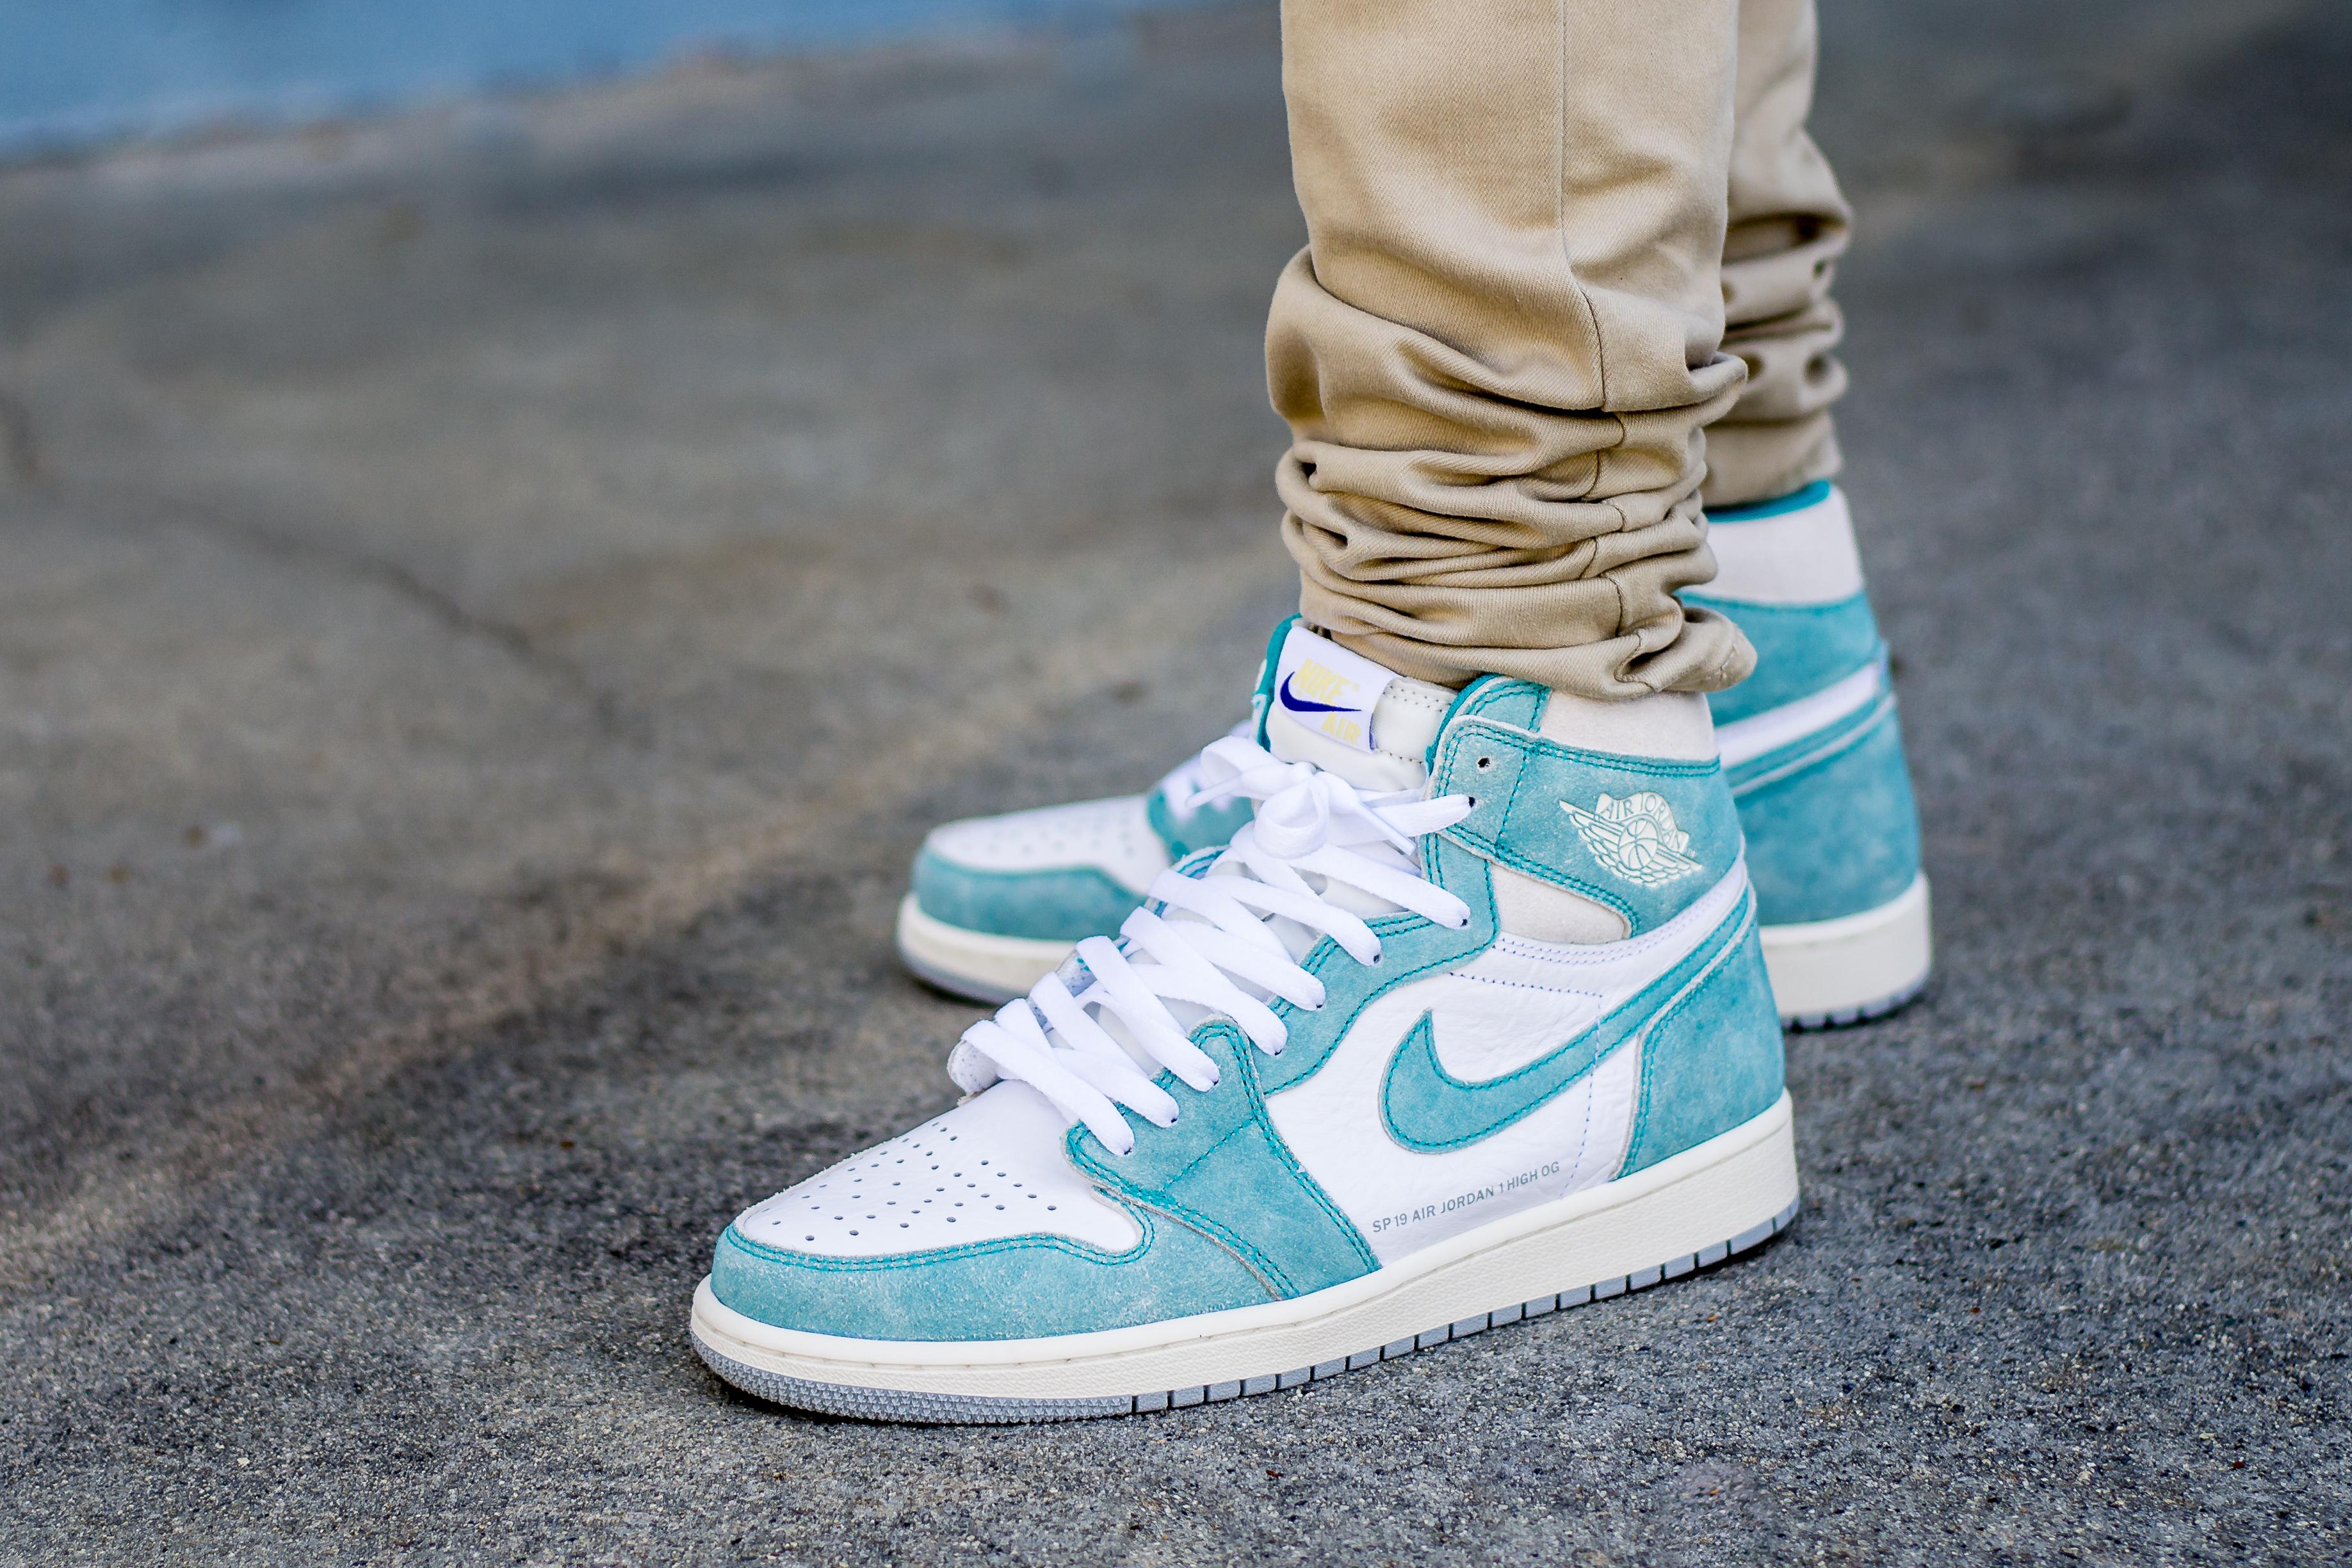 retro 1 turbo green outfit